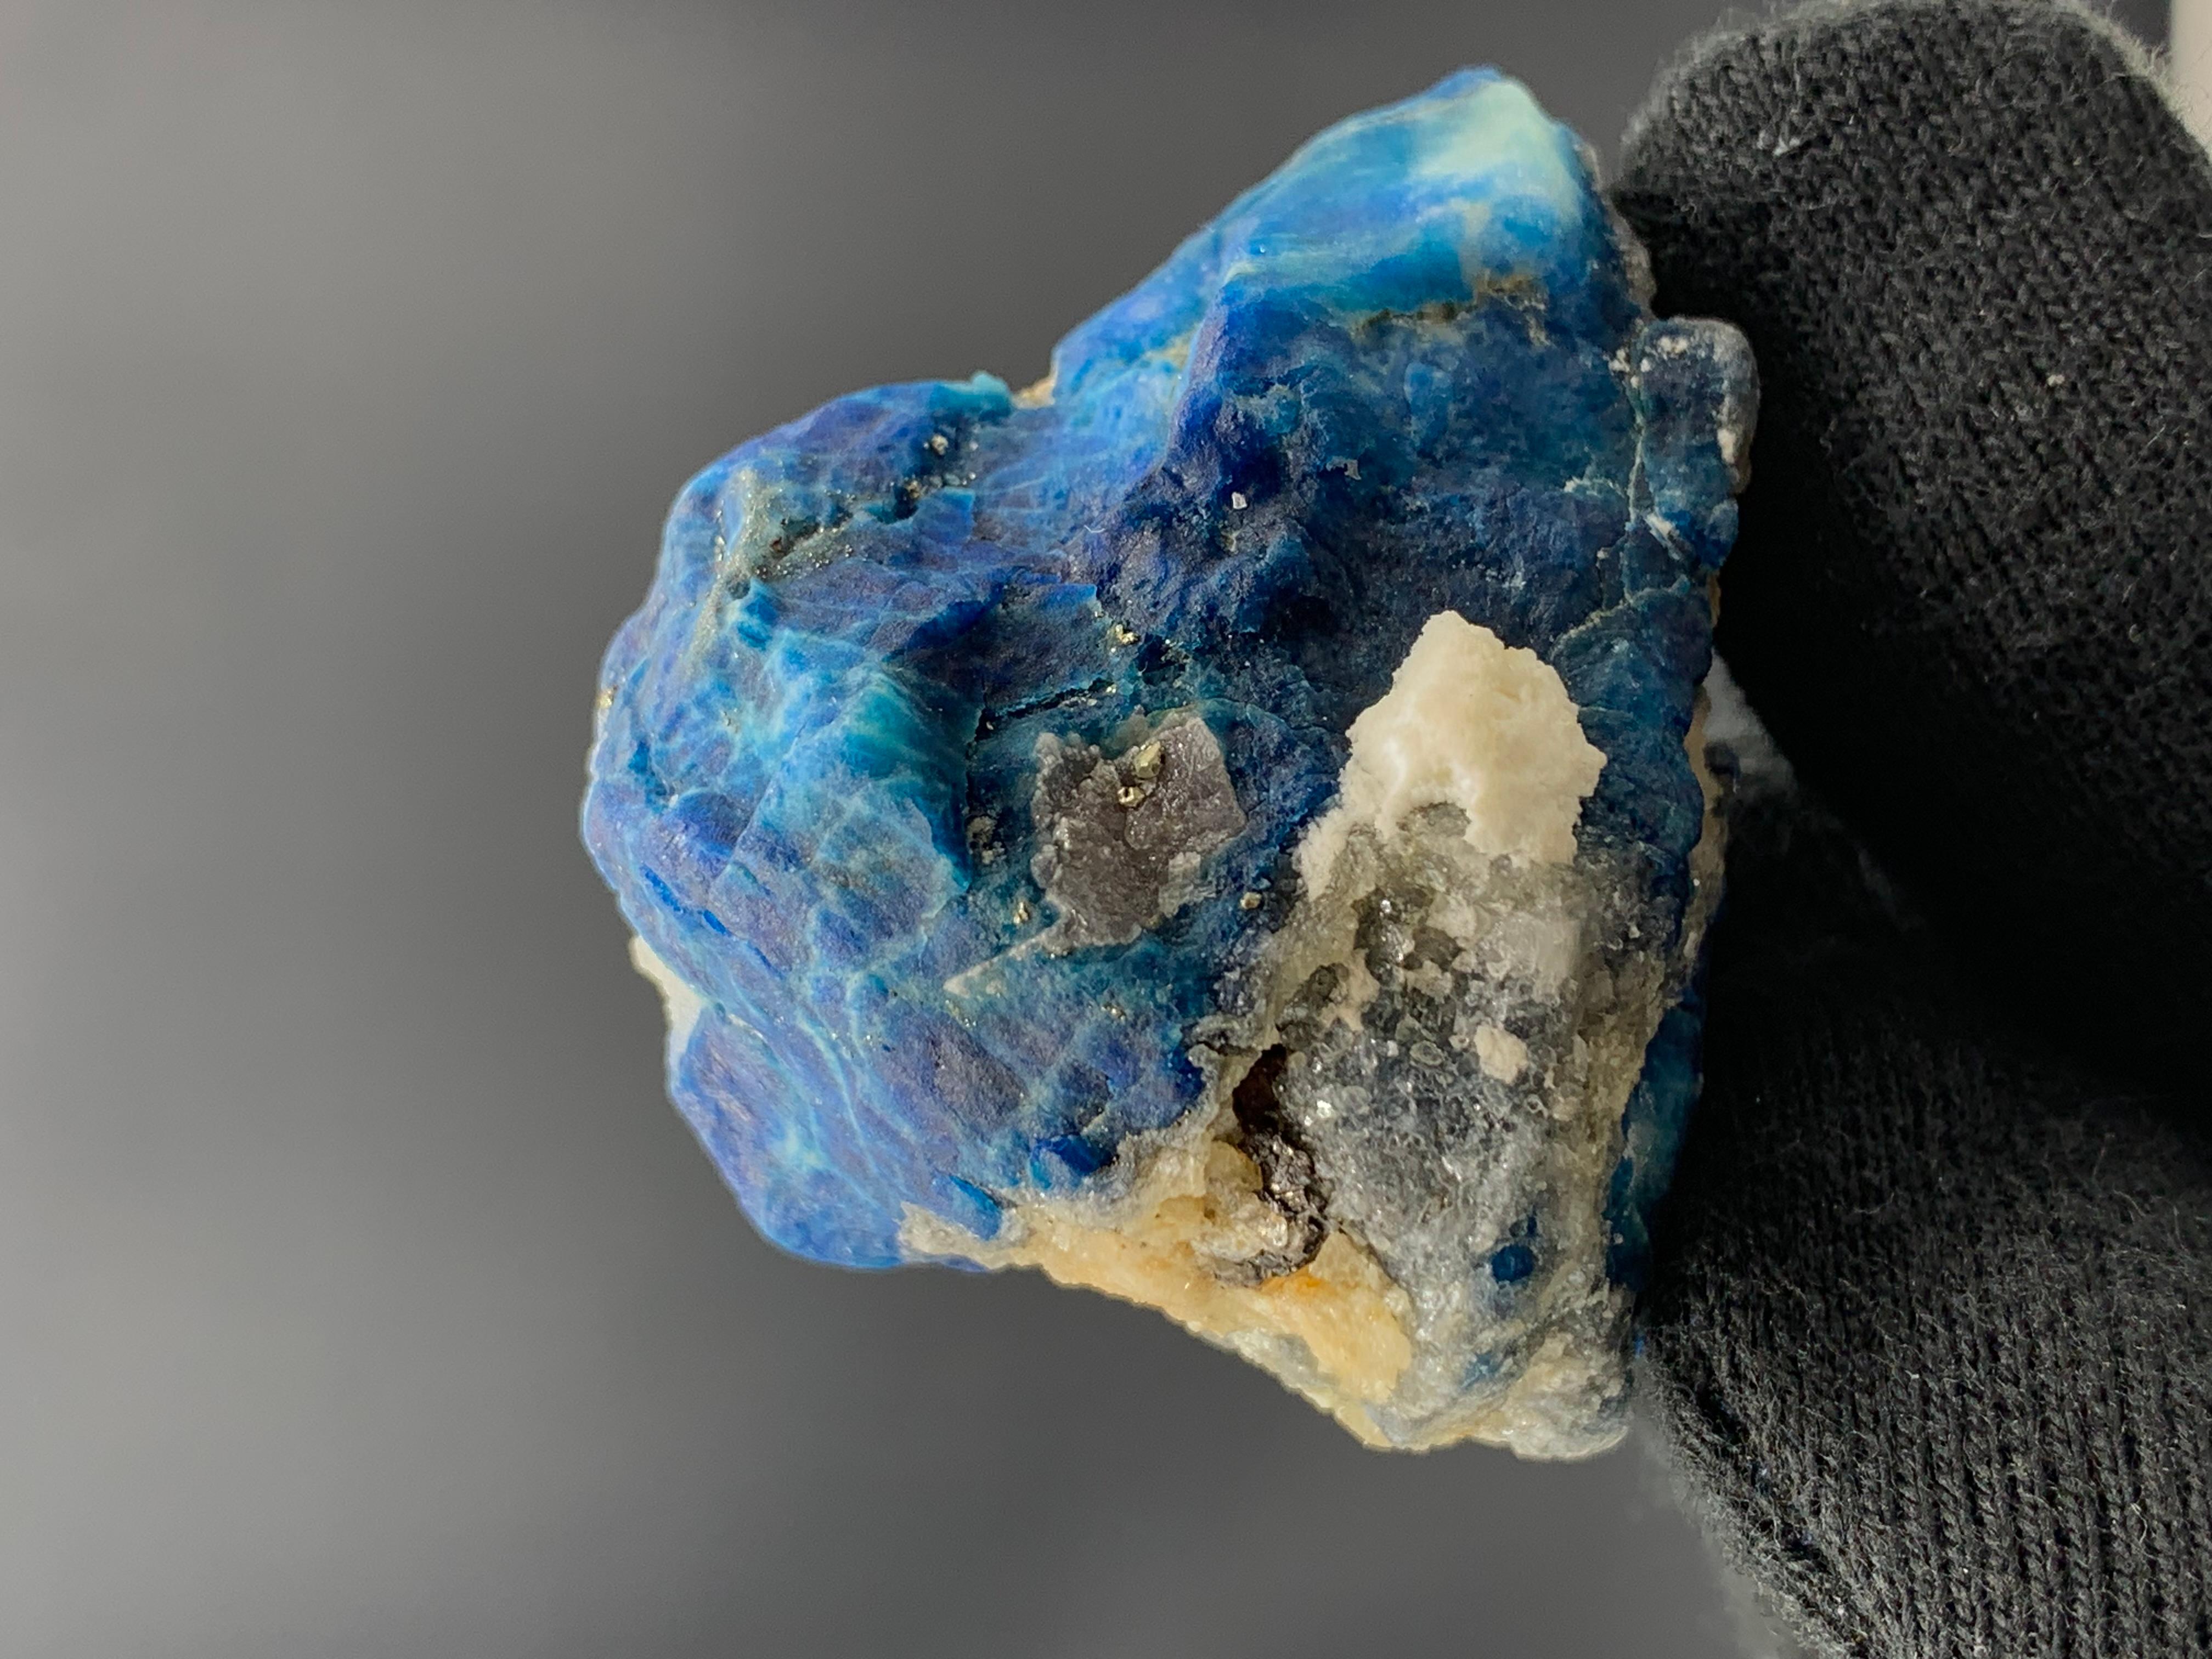 49.11 Gram Lovely Rare Afghanite Specimen From Afghanistan 

Weight: 49.11 Gram 
Dimension: 3.8 x 4.4 x 3.1 Cm 
Origin : Afghanistan 

Afghanite is named for Afghanistan, the country where it was first discovered. It's a head-turner with amazing